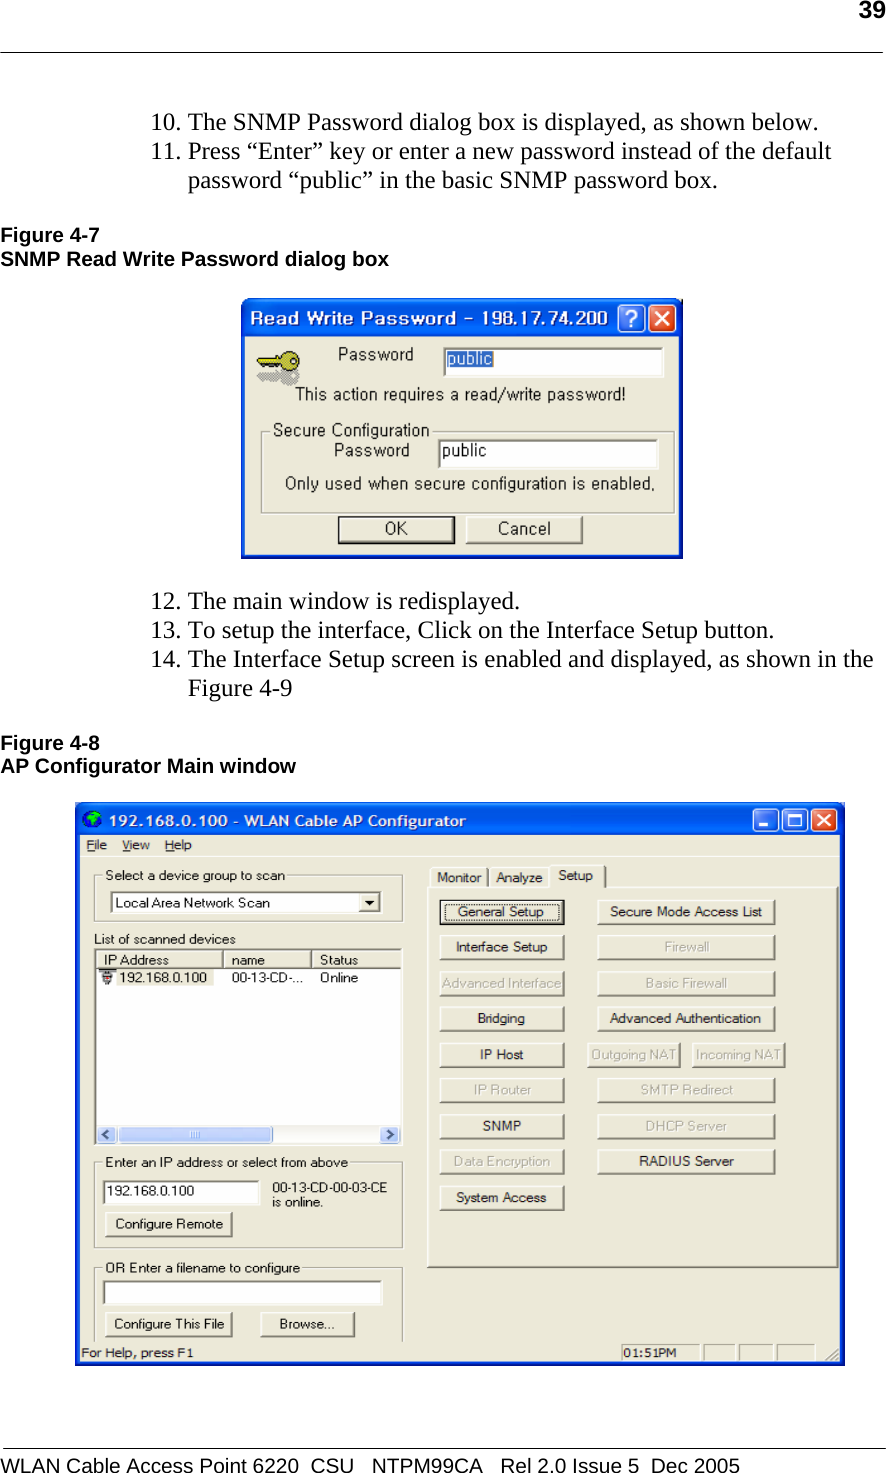   39  WLAN Cable Access Point 6220  CSU   NTPM99CA   Rel 2.0 Issue 5  Dec 2005 10. The SNMP Password dialog box is displayed, as shown below. 11. Press “Enter” key or enter a new password instead of the default password “public” in the basic SNMP password box.   Figure 4-7 SNMP Read Write Password dialog box    12. The main window is redisplayed.  13. To setup the interface, Click on the Interface Setup button.  14. The Interface Setup screen is enabled and displayed, as shown in the Figure 4-9  Figure 4-8  AP Configurator Main window     